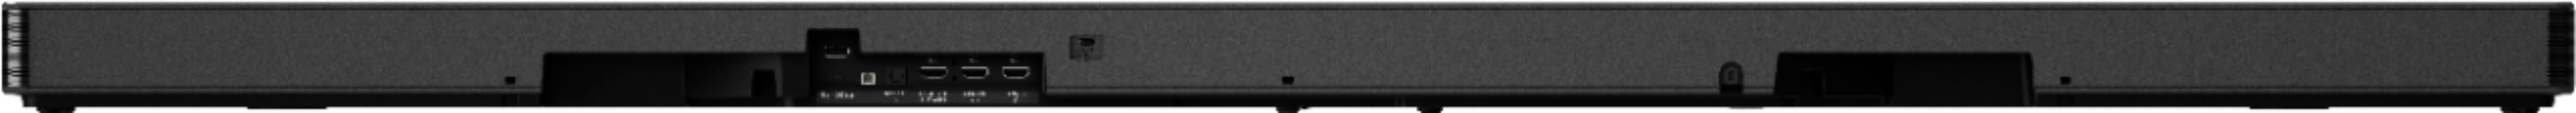 Back View: LG - 5.1.2-Channel 570W Soundbar System with Wireless Subwoofer and Dolby Atmos with Google Assistant - Black